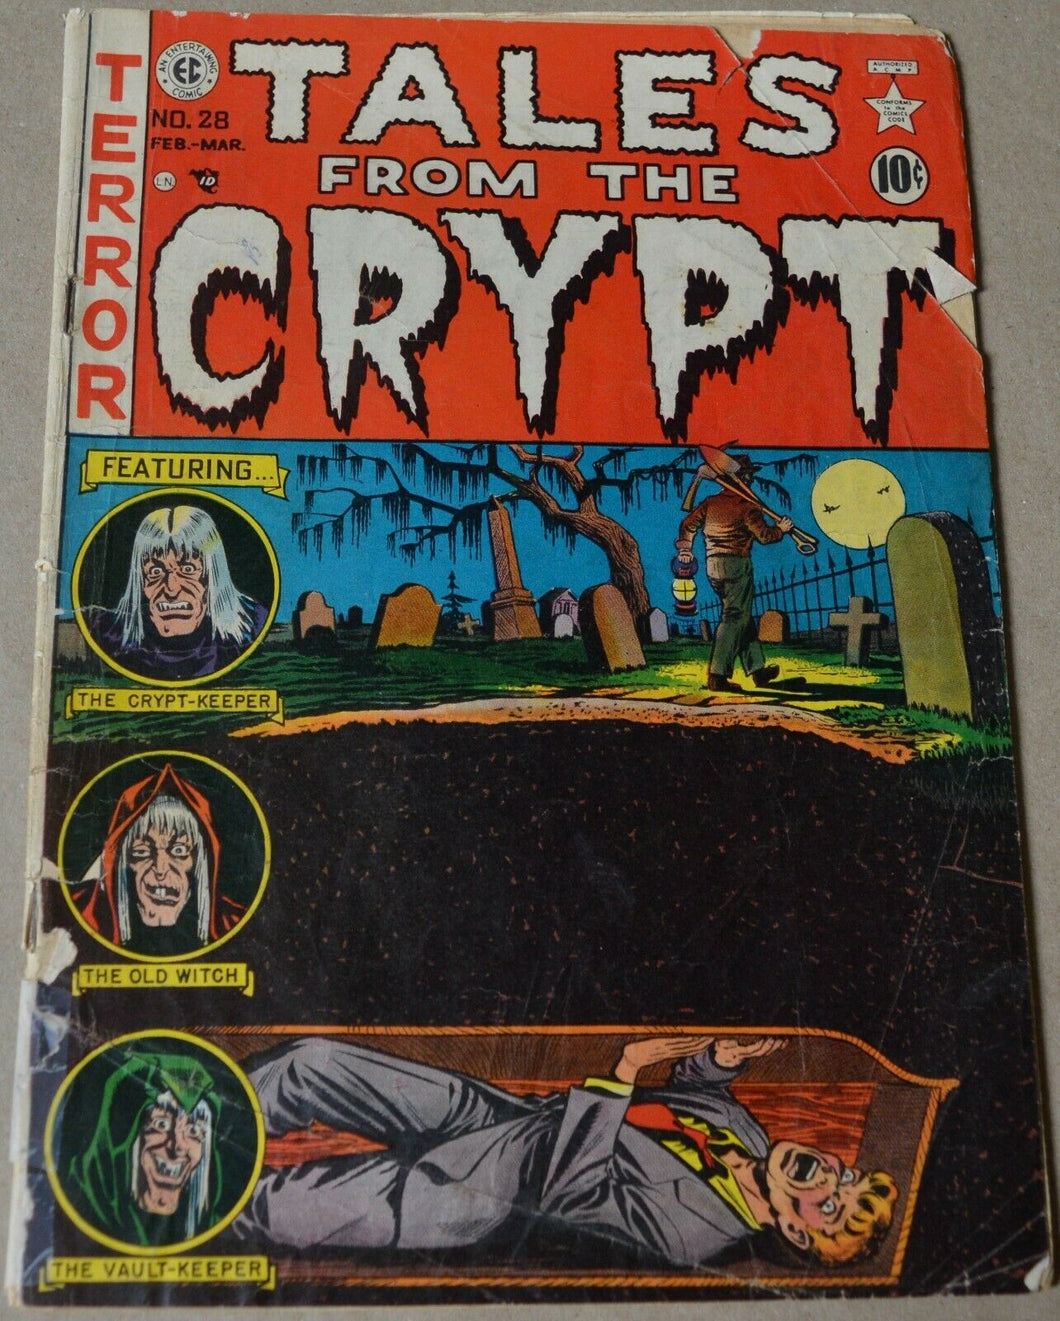 TALES FROM THE CRYPT #28 (EC, 1952) GOLDEN AGE!!